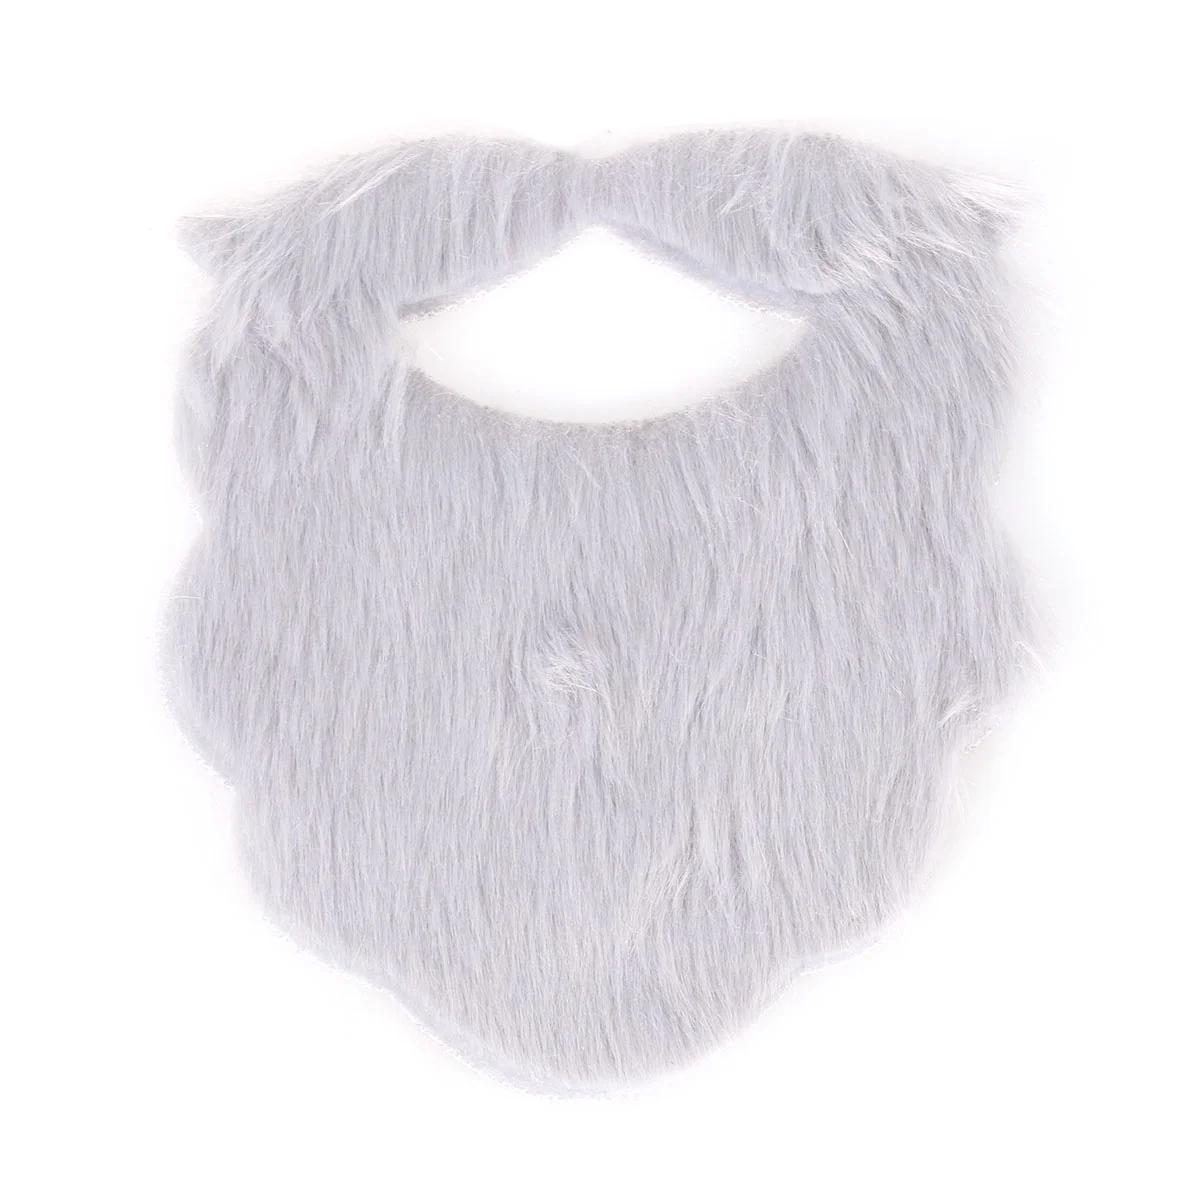 

Halloween Costume Party Fake Mustaches Funny Beards Whisker Festival Supplies (Gray)